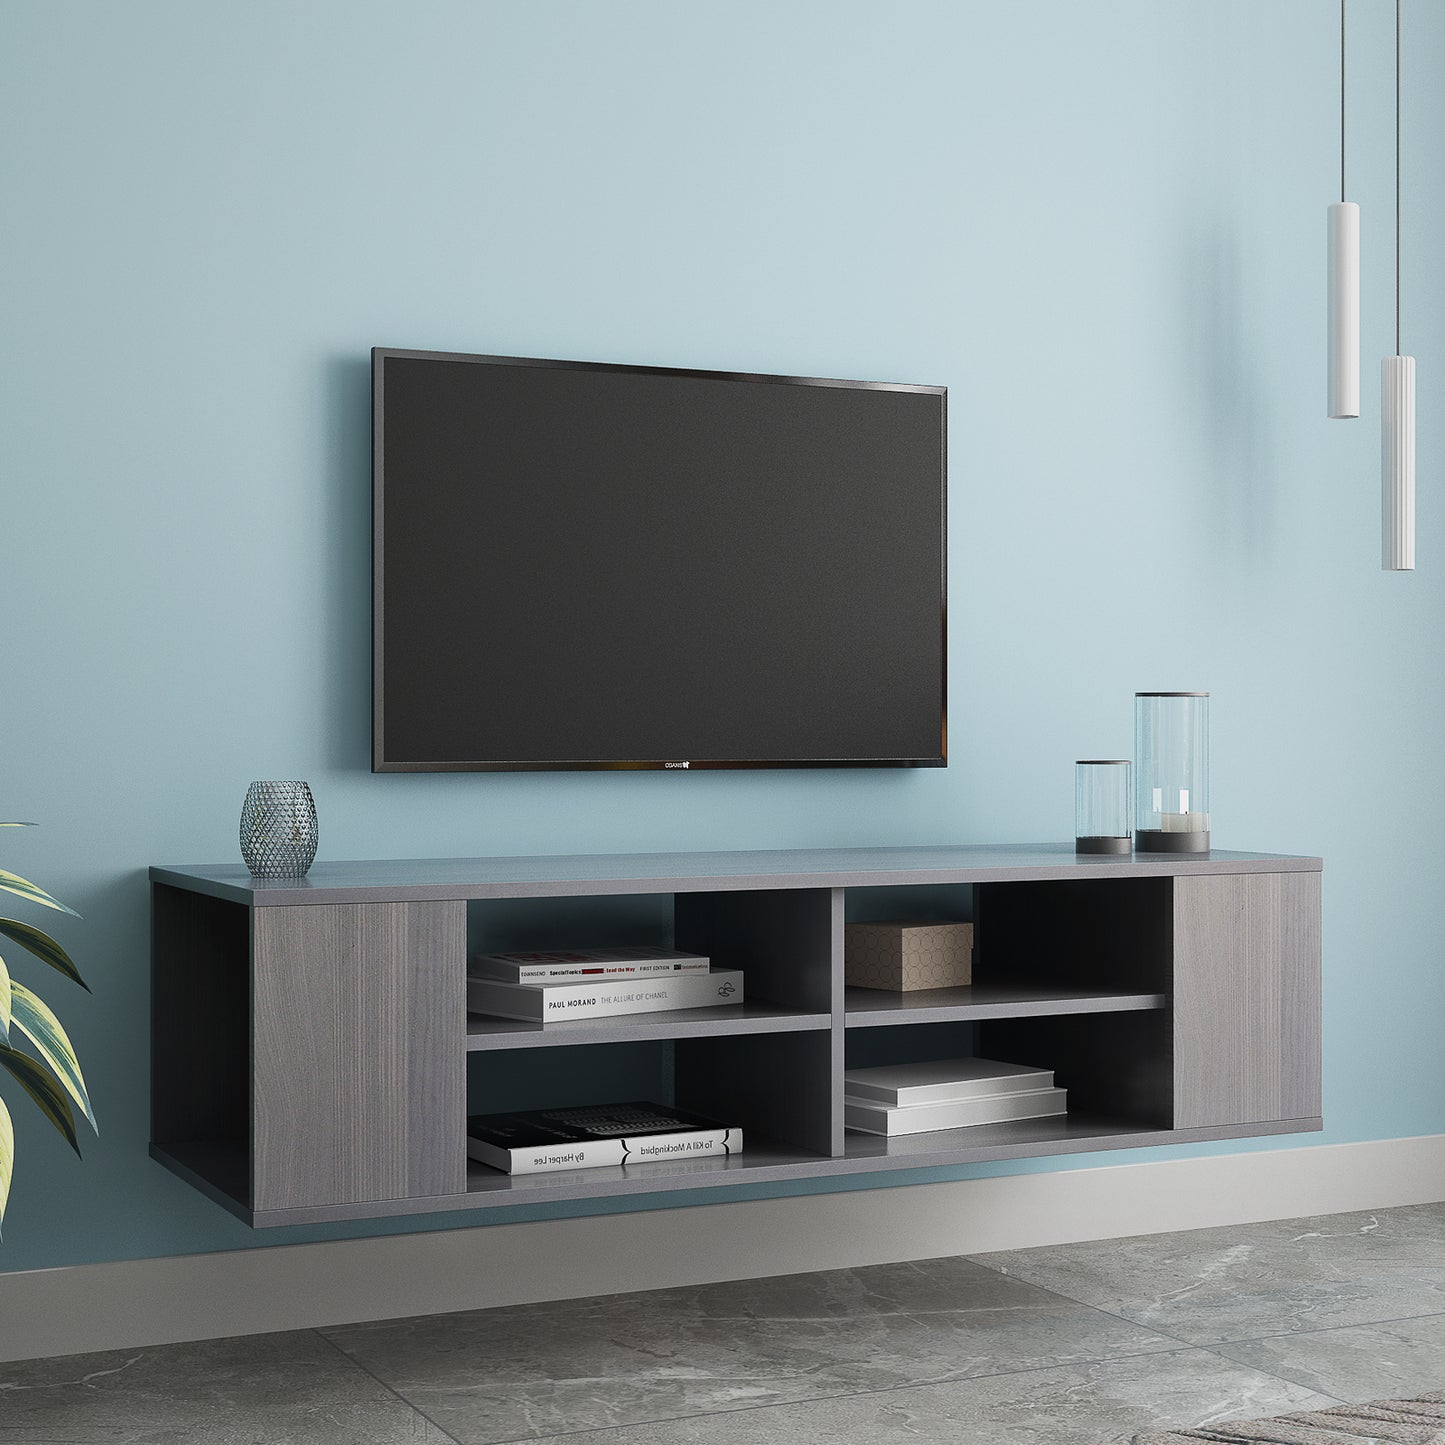 paproos Floating TV Stand, LJC